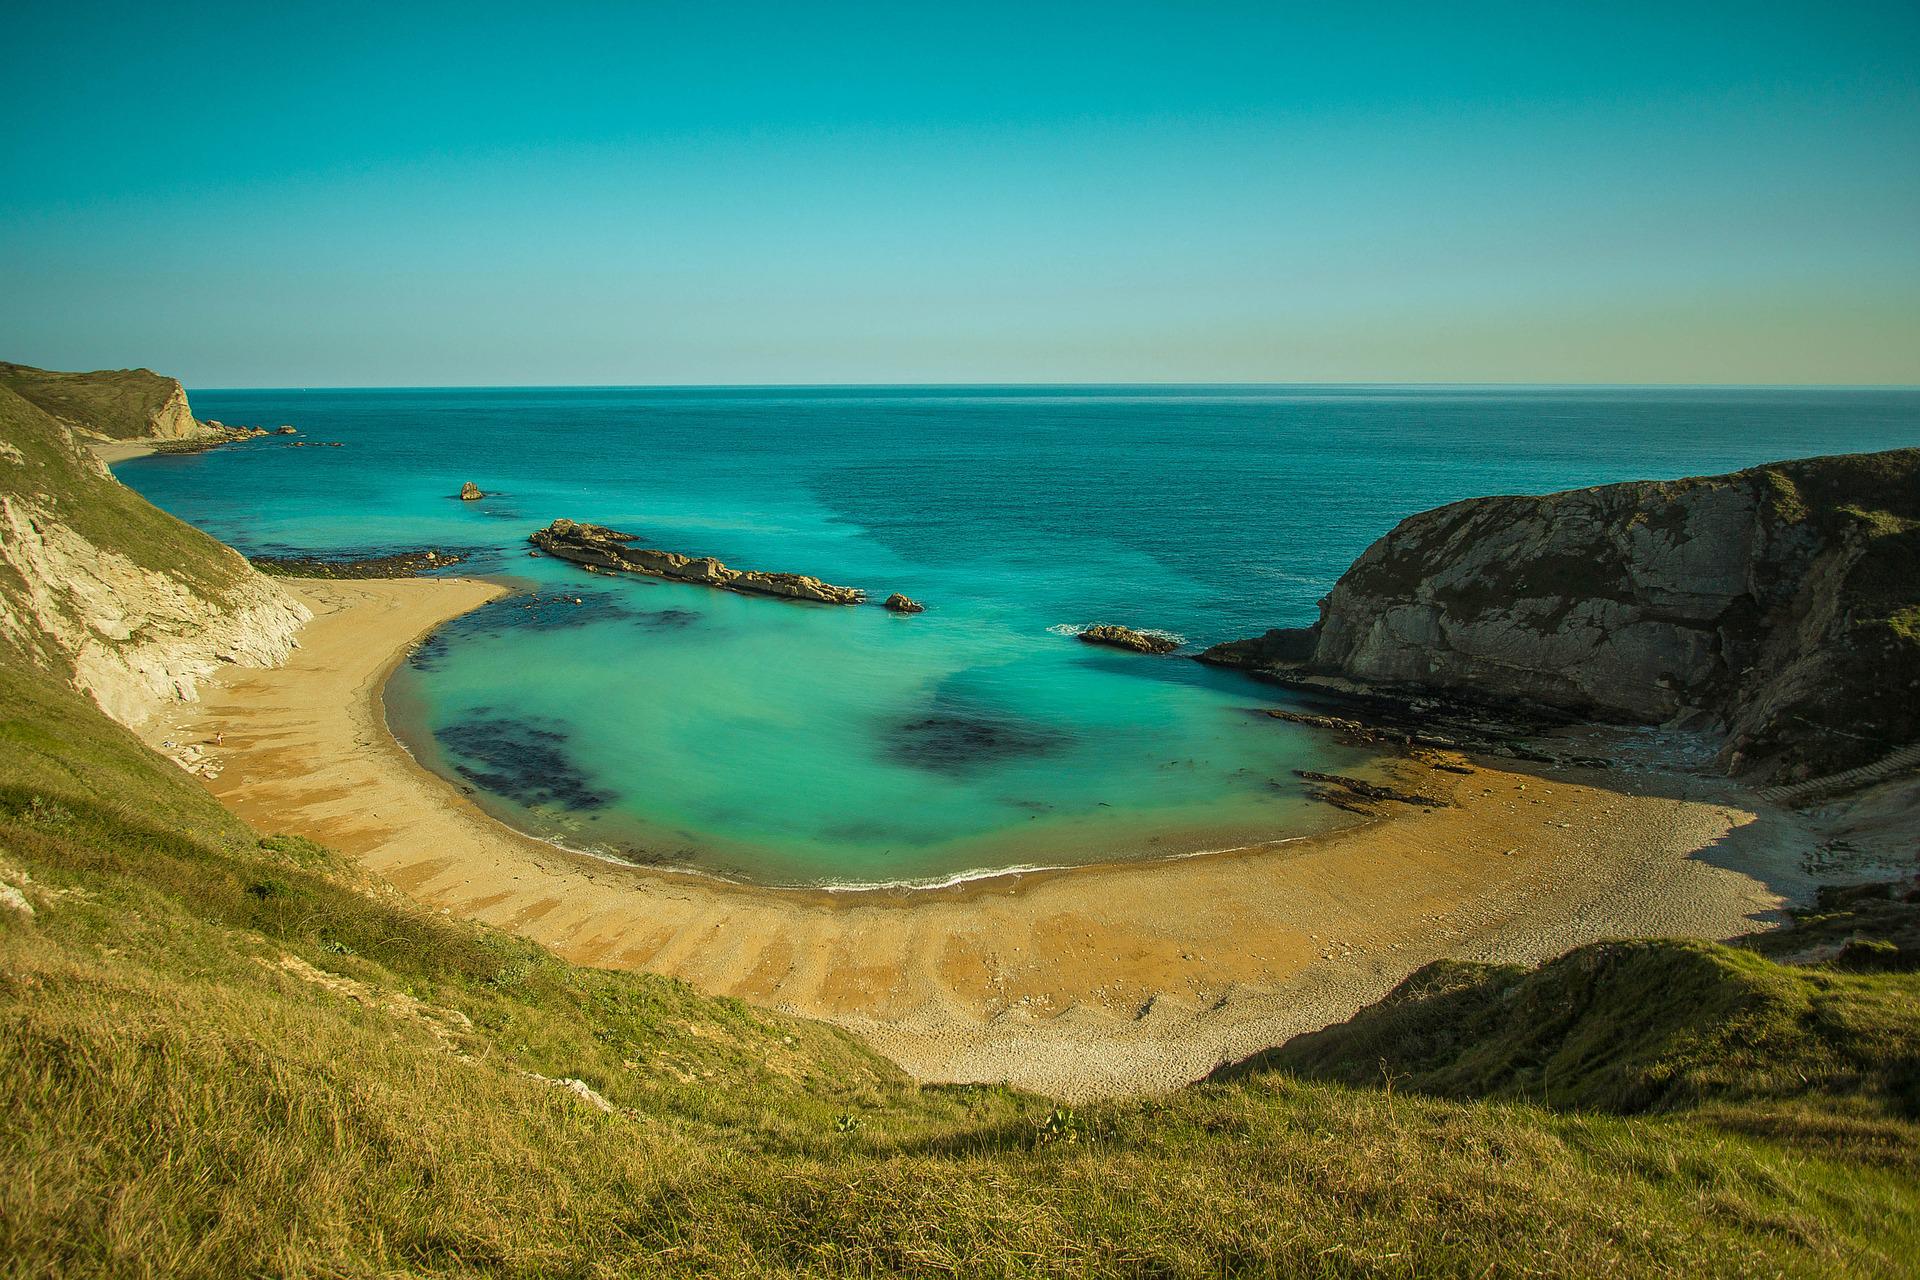 Dorset is home to some spectacular views